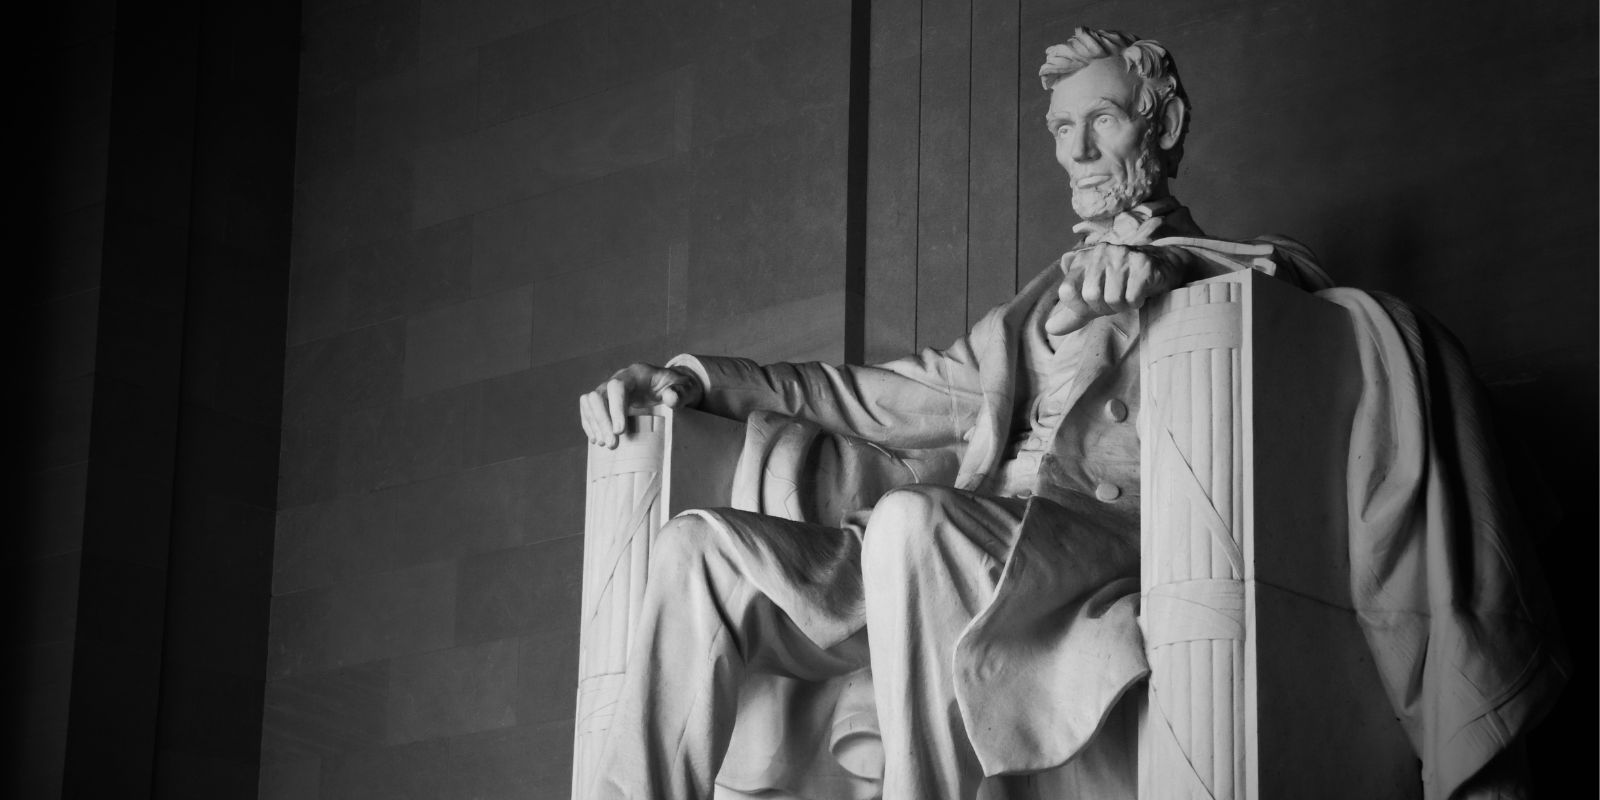 November 6th: Lincoln Elected As 16th President